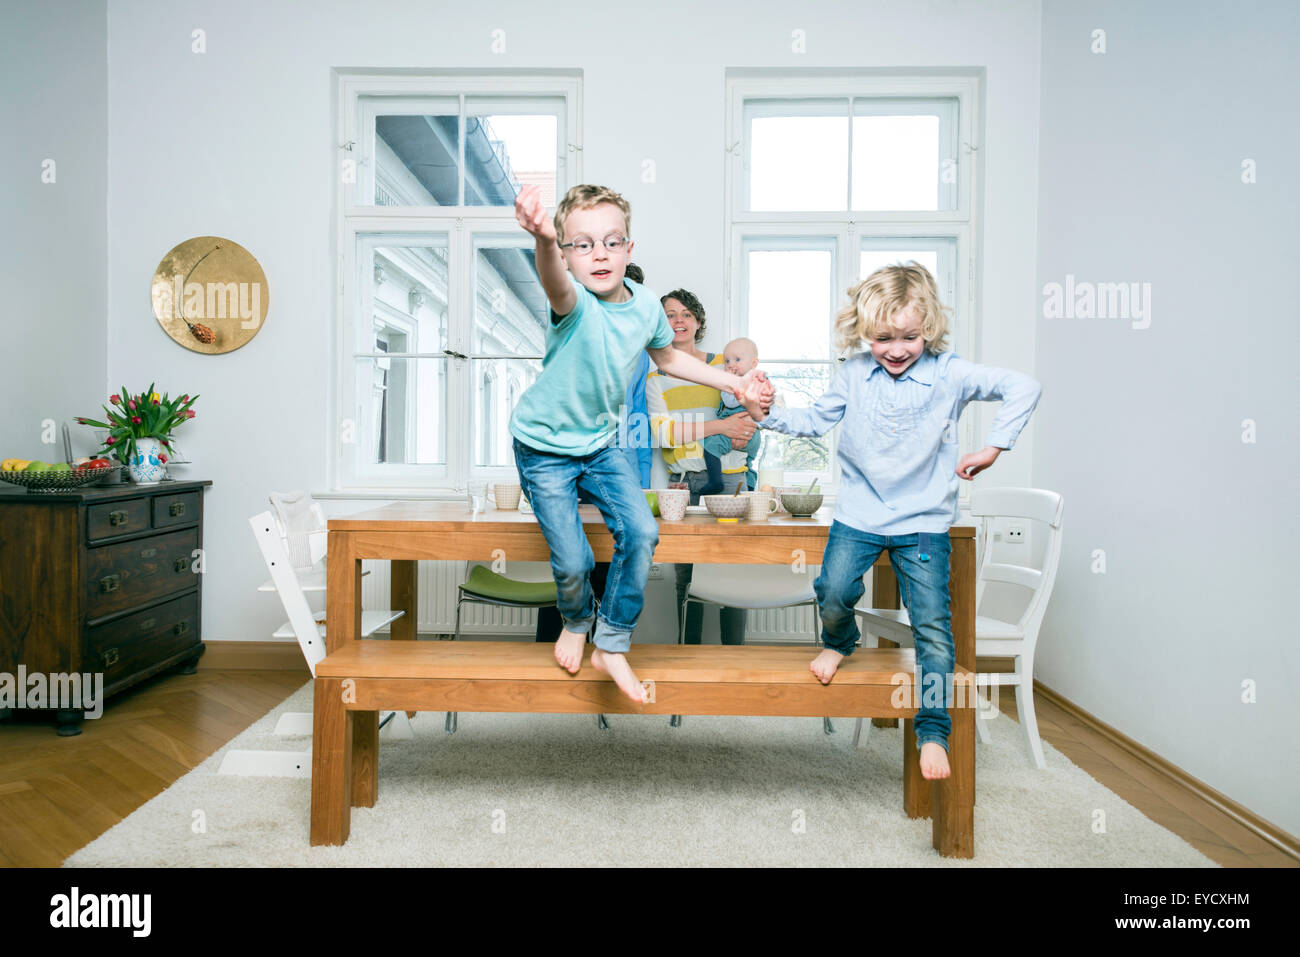 Family with three children in living room Stock Photo